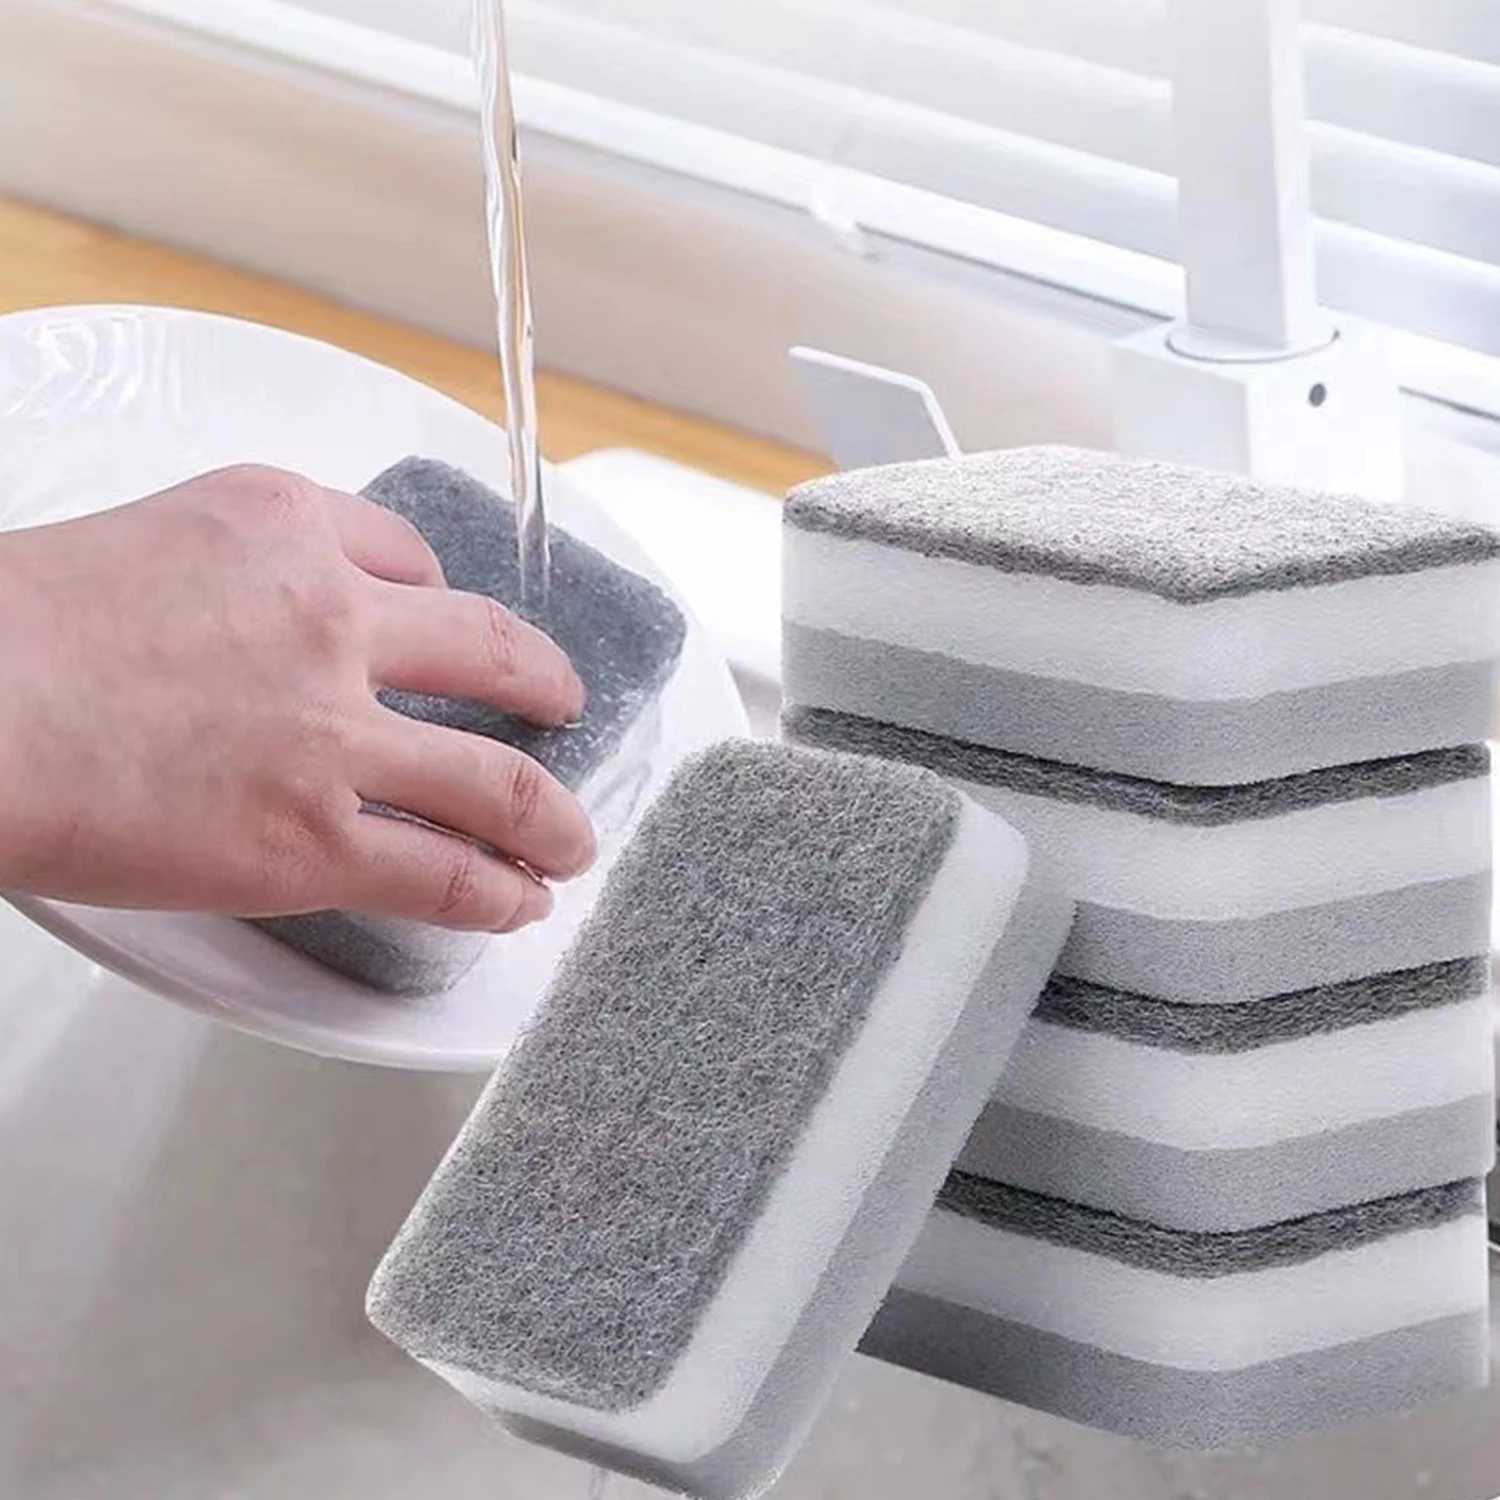 

Pot Washing Sponges Double-sided Cleaning Spongs Household Scouring Pad Wipe Dishwashing Sponge Cloth Dish Kitchen Tools